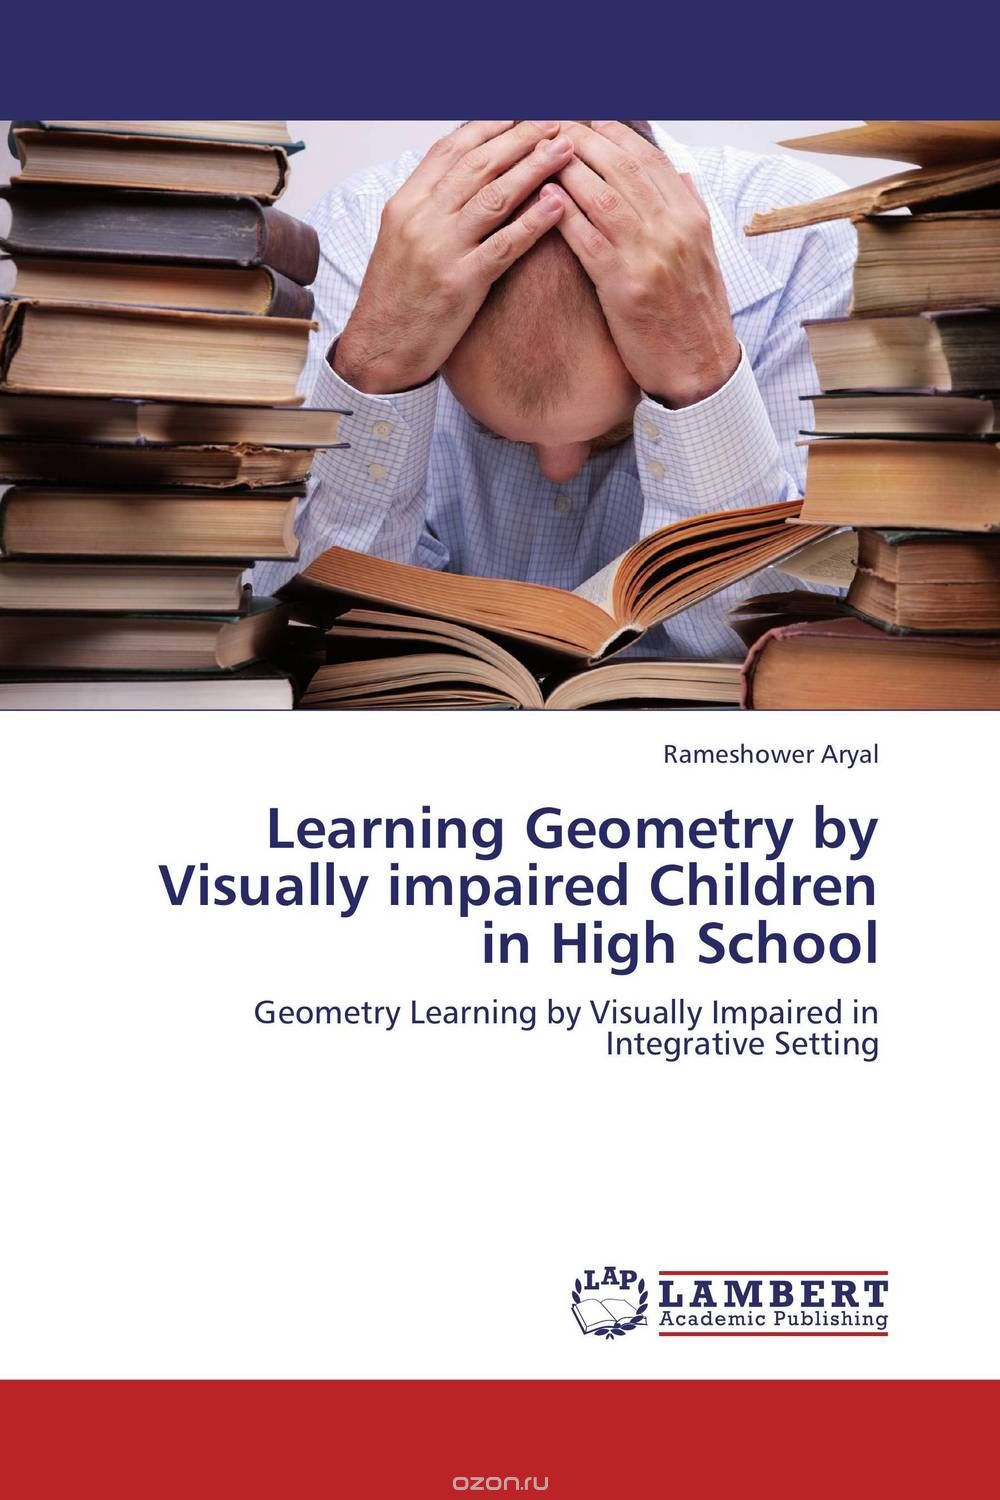 Learning Geometry by Visually impaired Children in High School